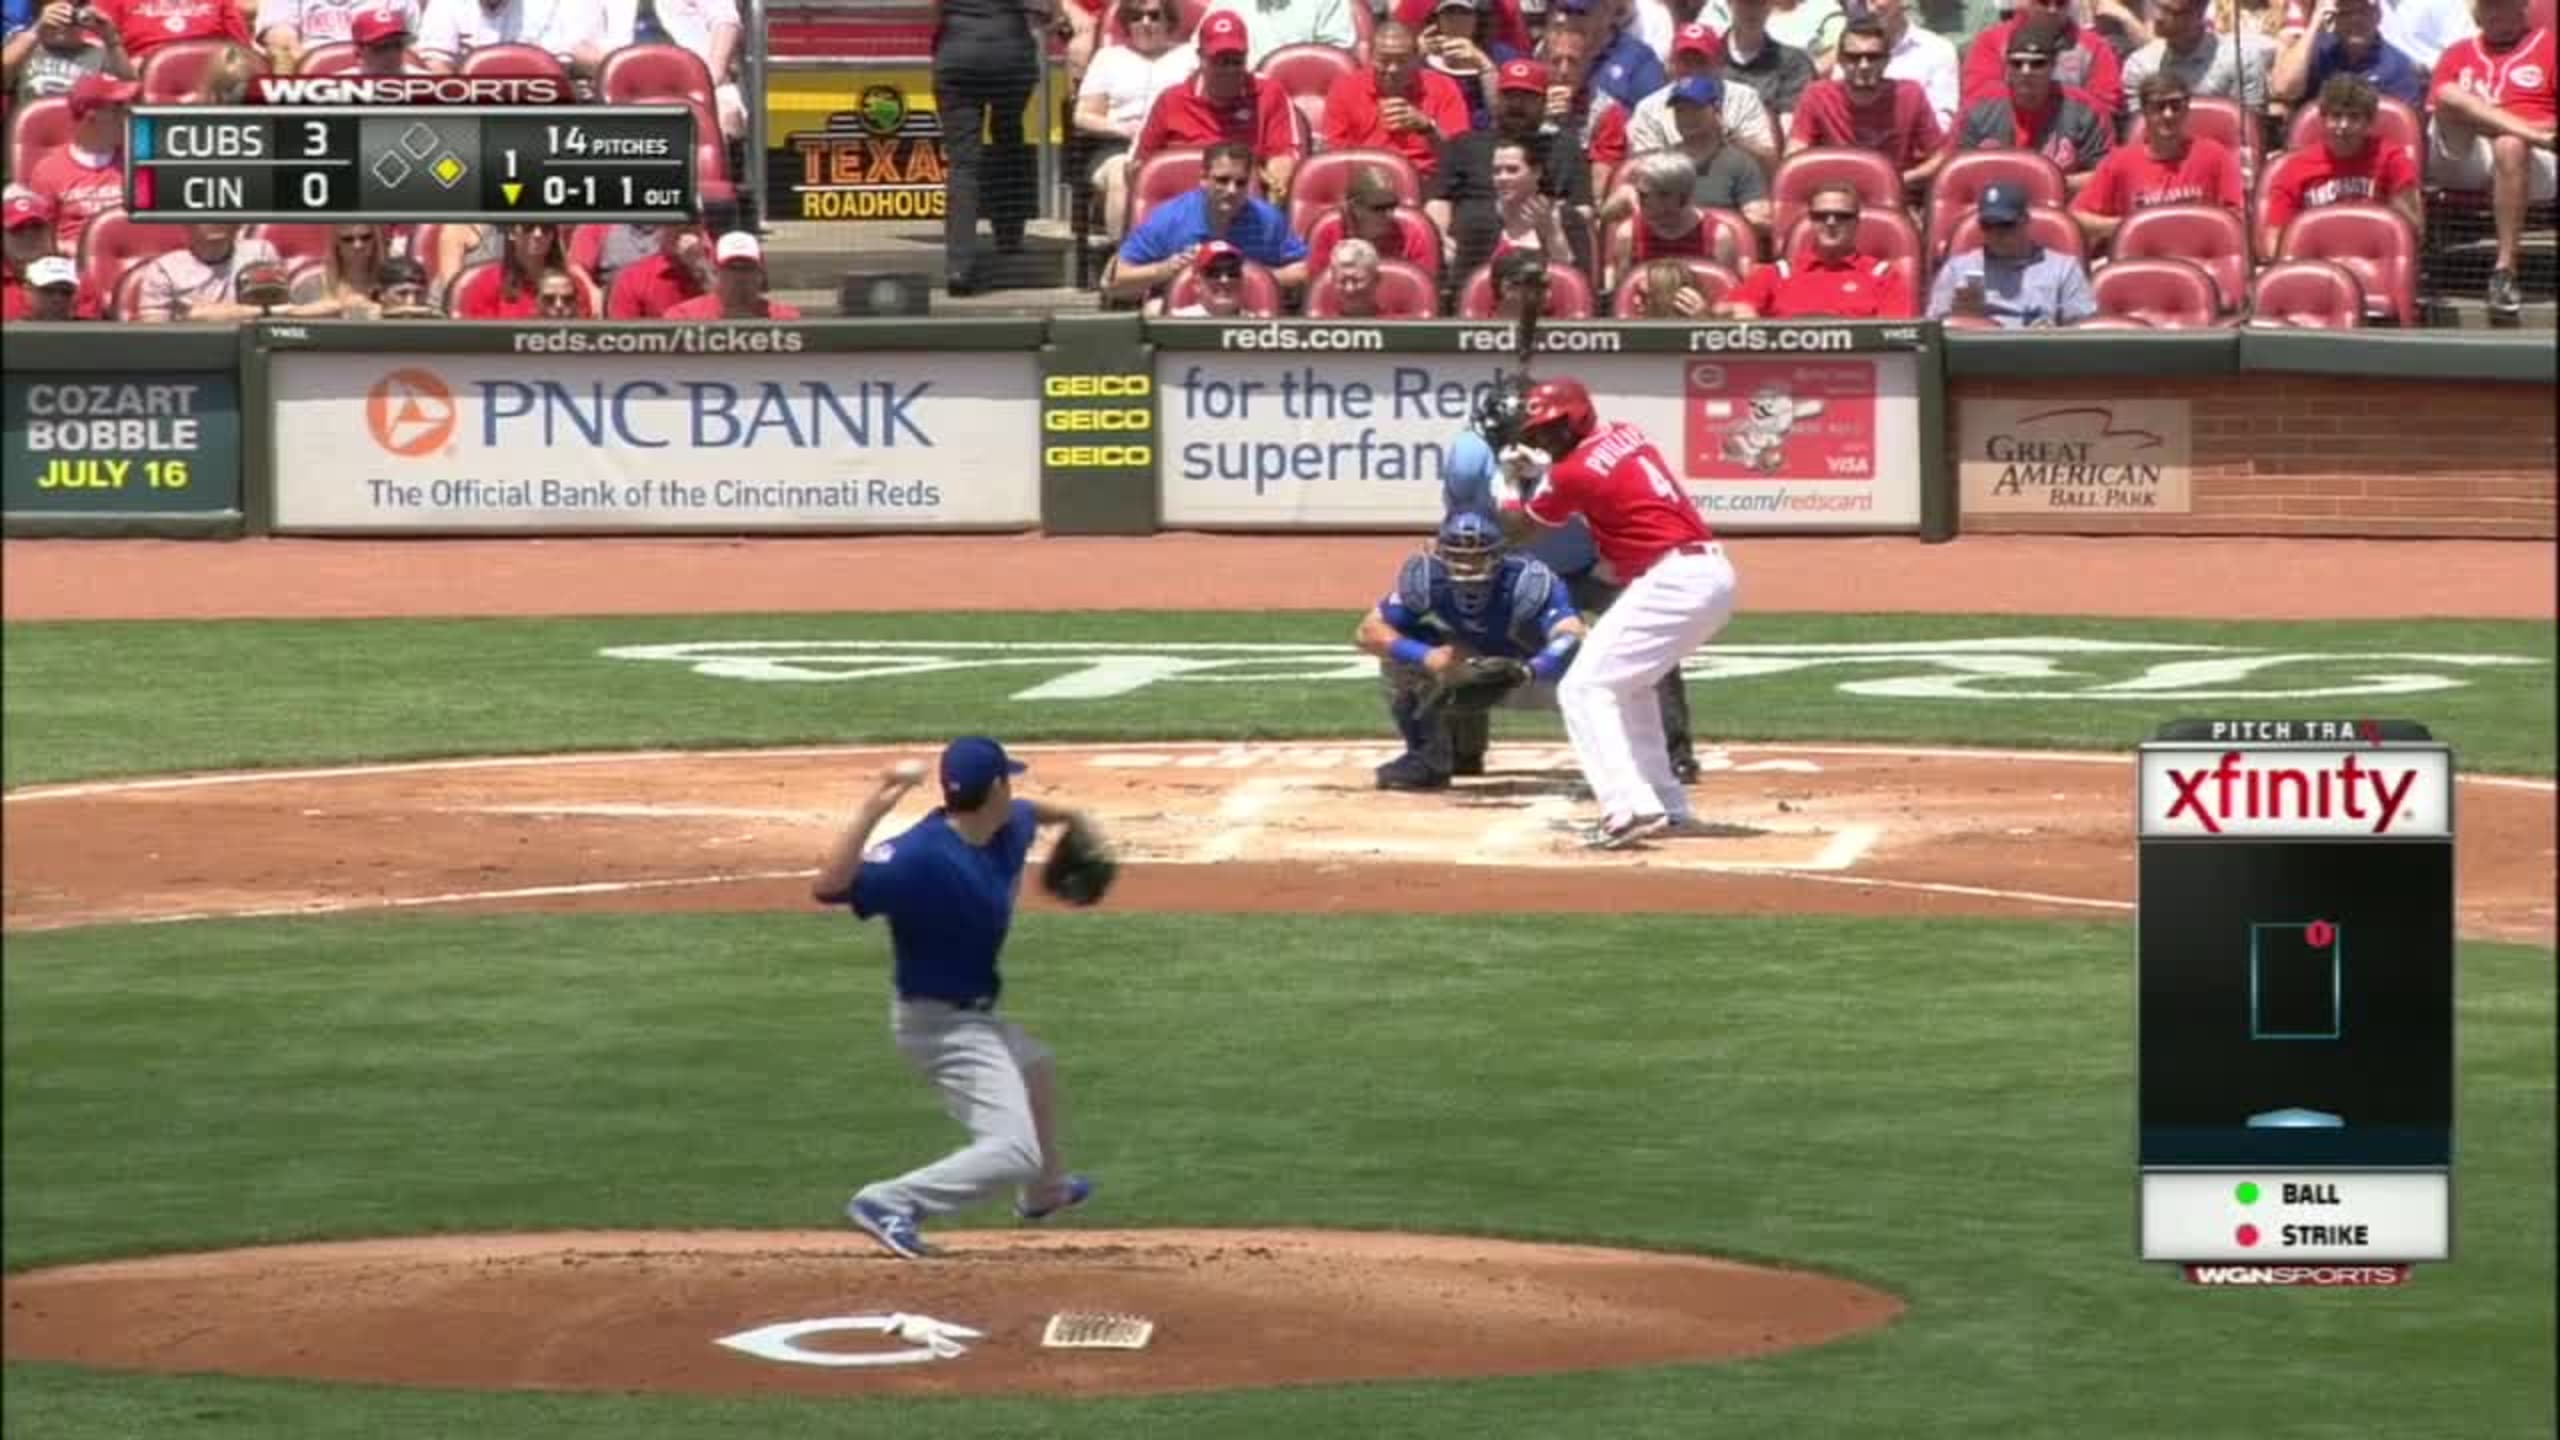 Brandon Phillips pops out to first baseman Anthony Rizzo.